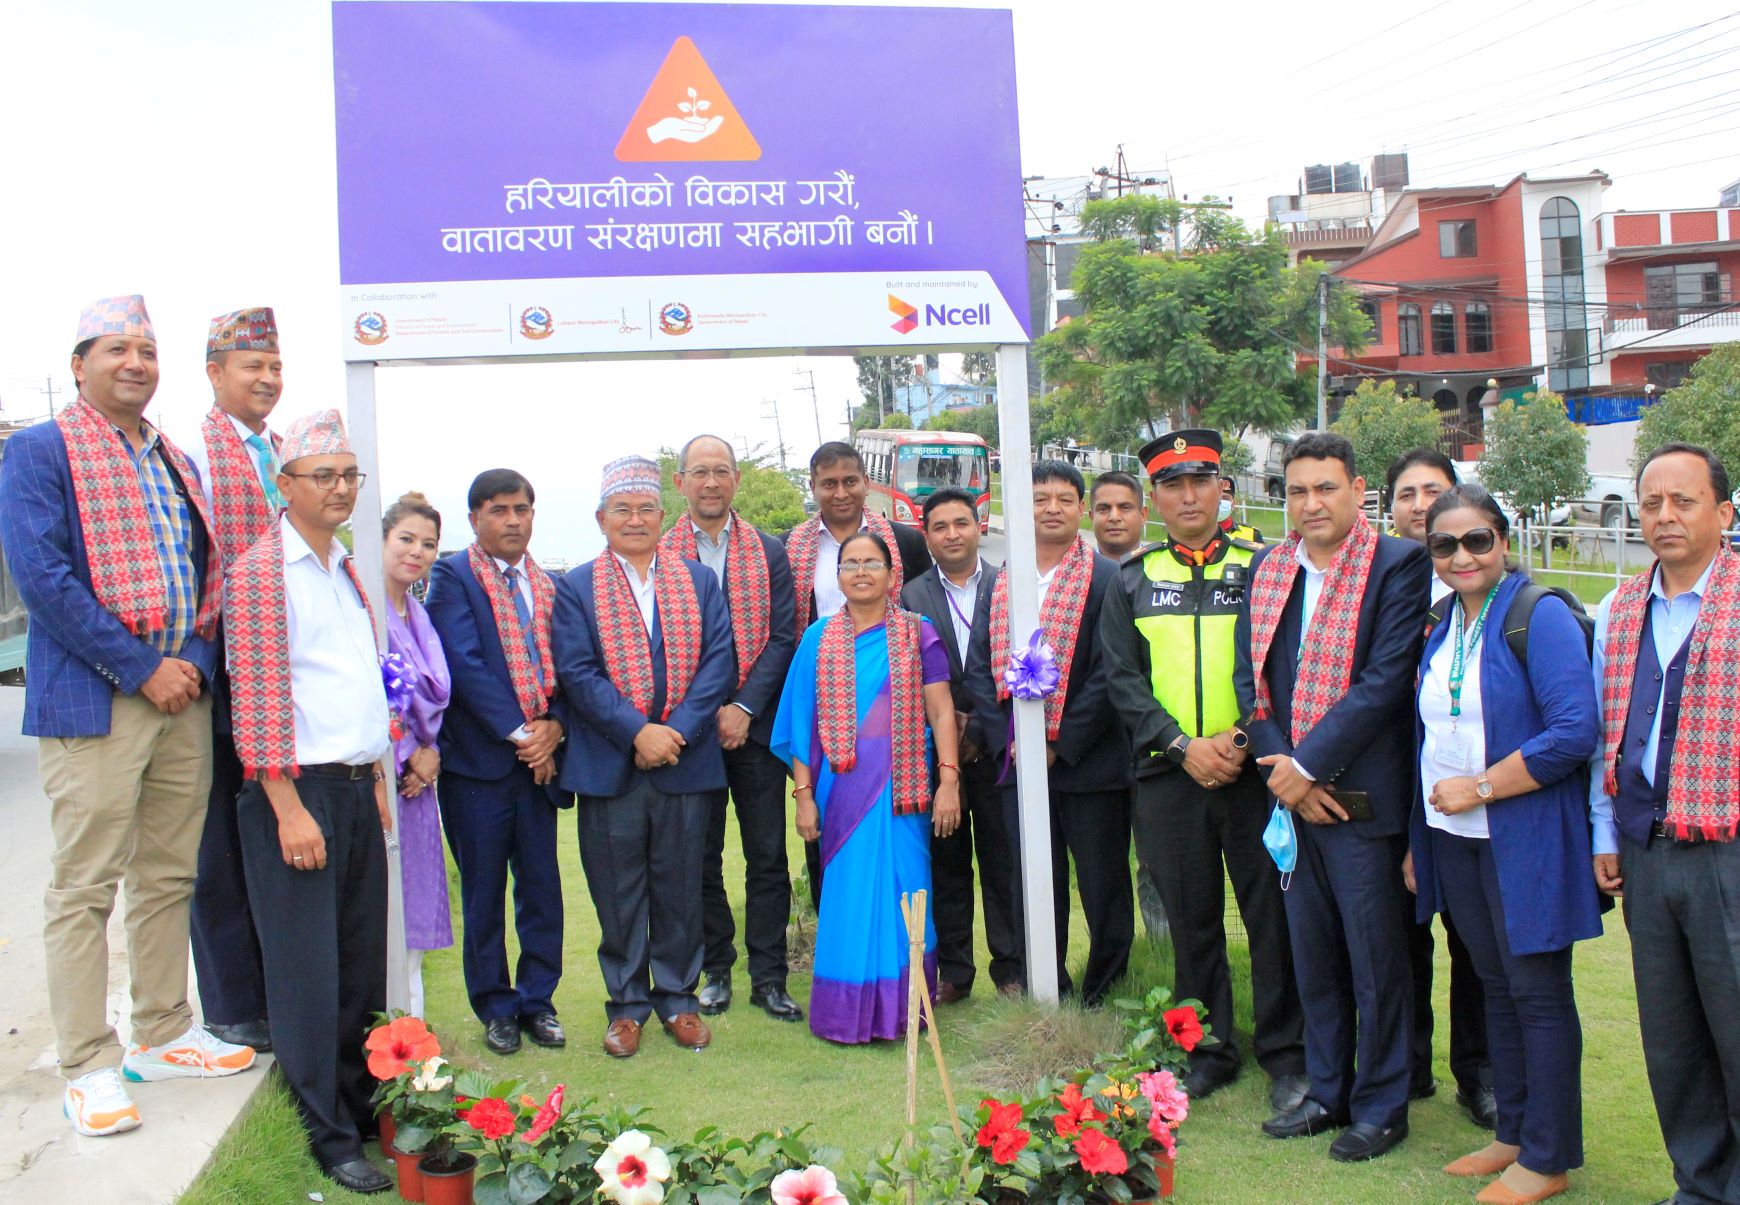 Ncell’s CSR initiative ‘Greening of Ring Road’ inaugurated